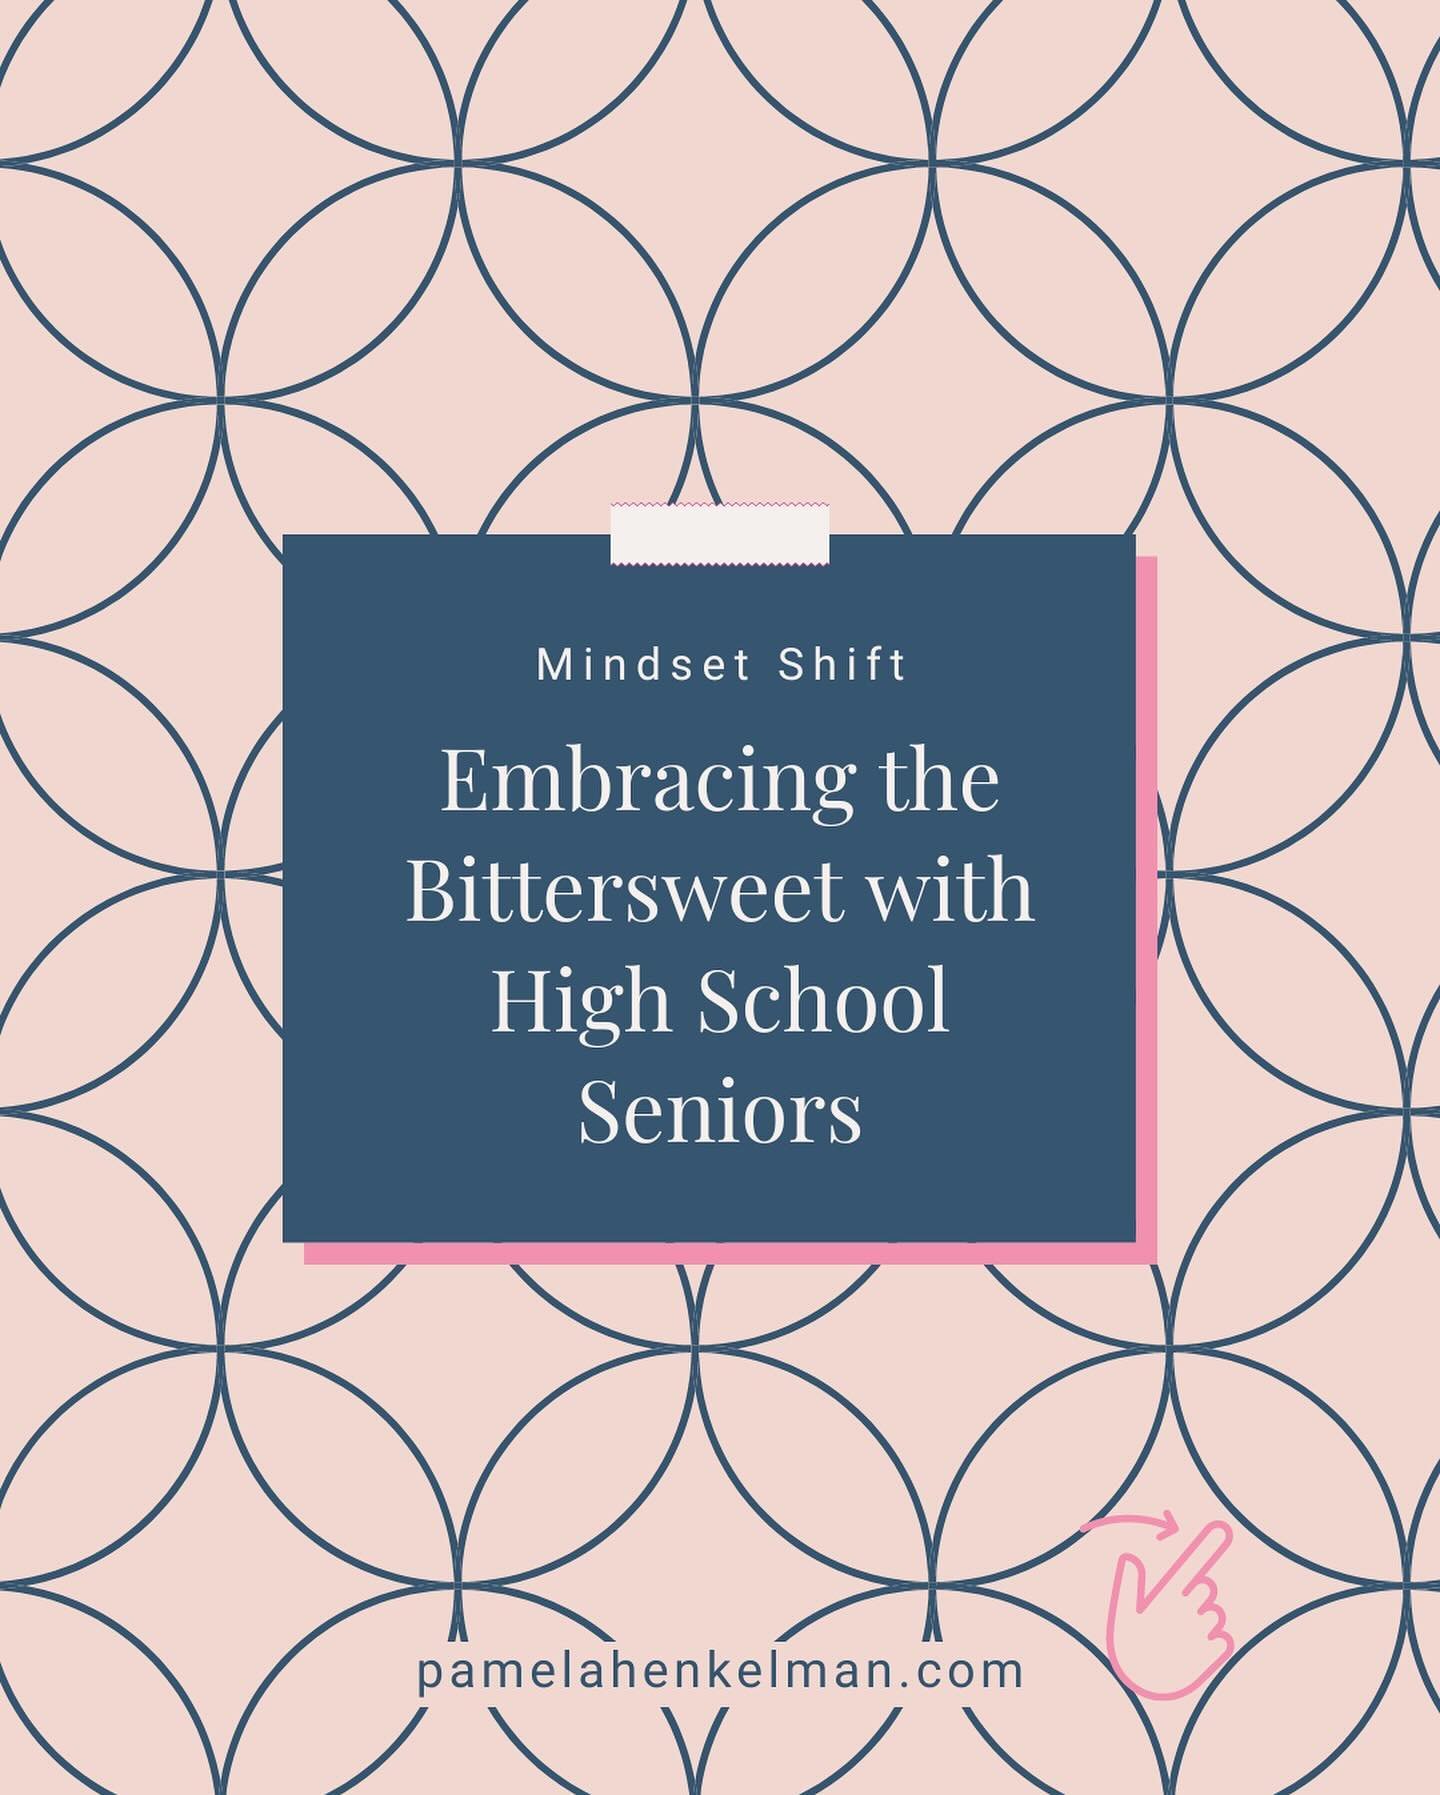 Momma with the high school senior, you&rsquo;re gonna need this!✅

The apostle Paul, wrote a letter to the church at Philippi, but he might as well have said, &ldquo;Hey, mom, you&rsquo;re gonna need this when you&rsquo;re kid is a senior.&rdquo; 
As